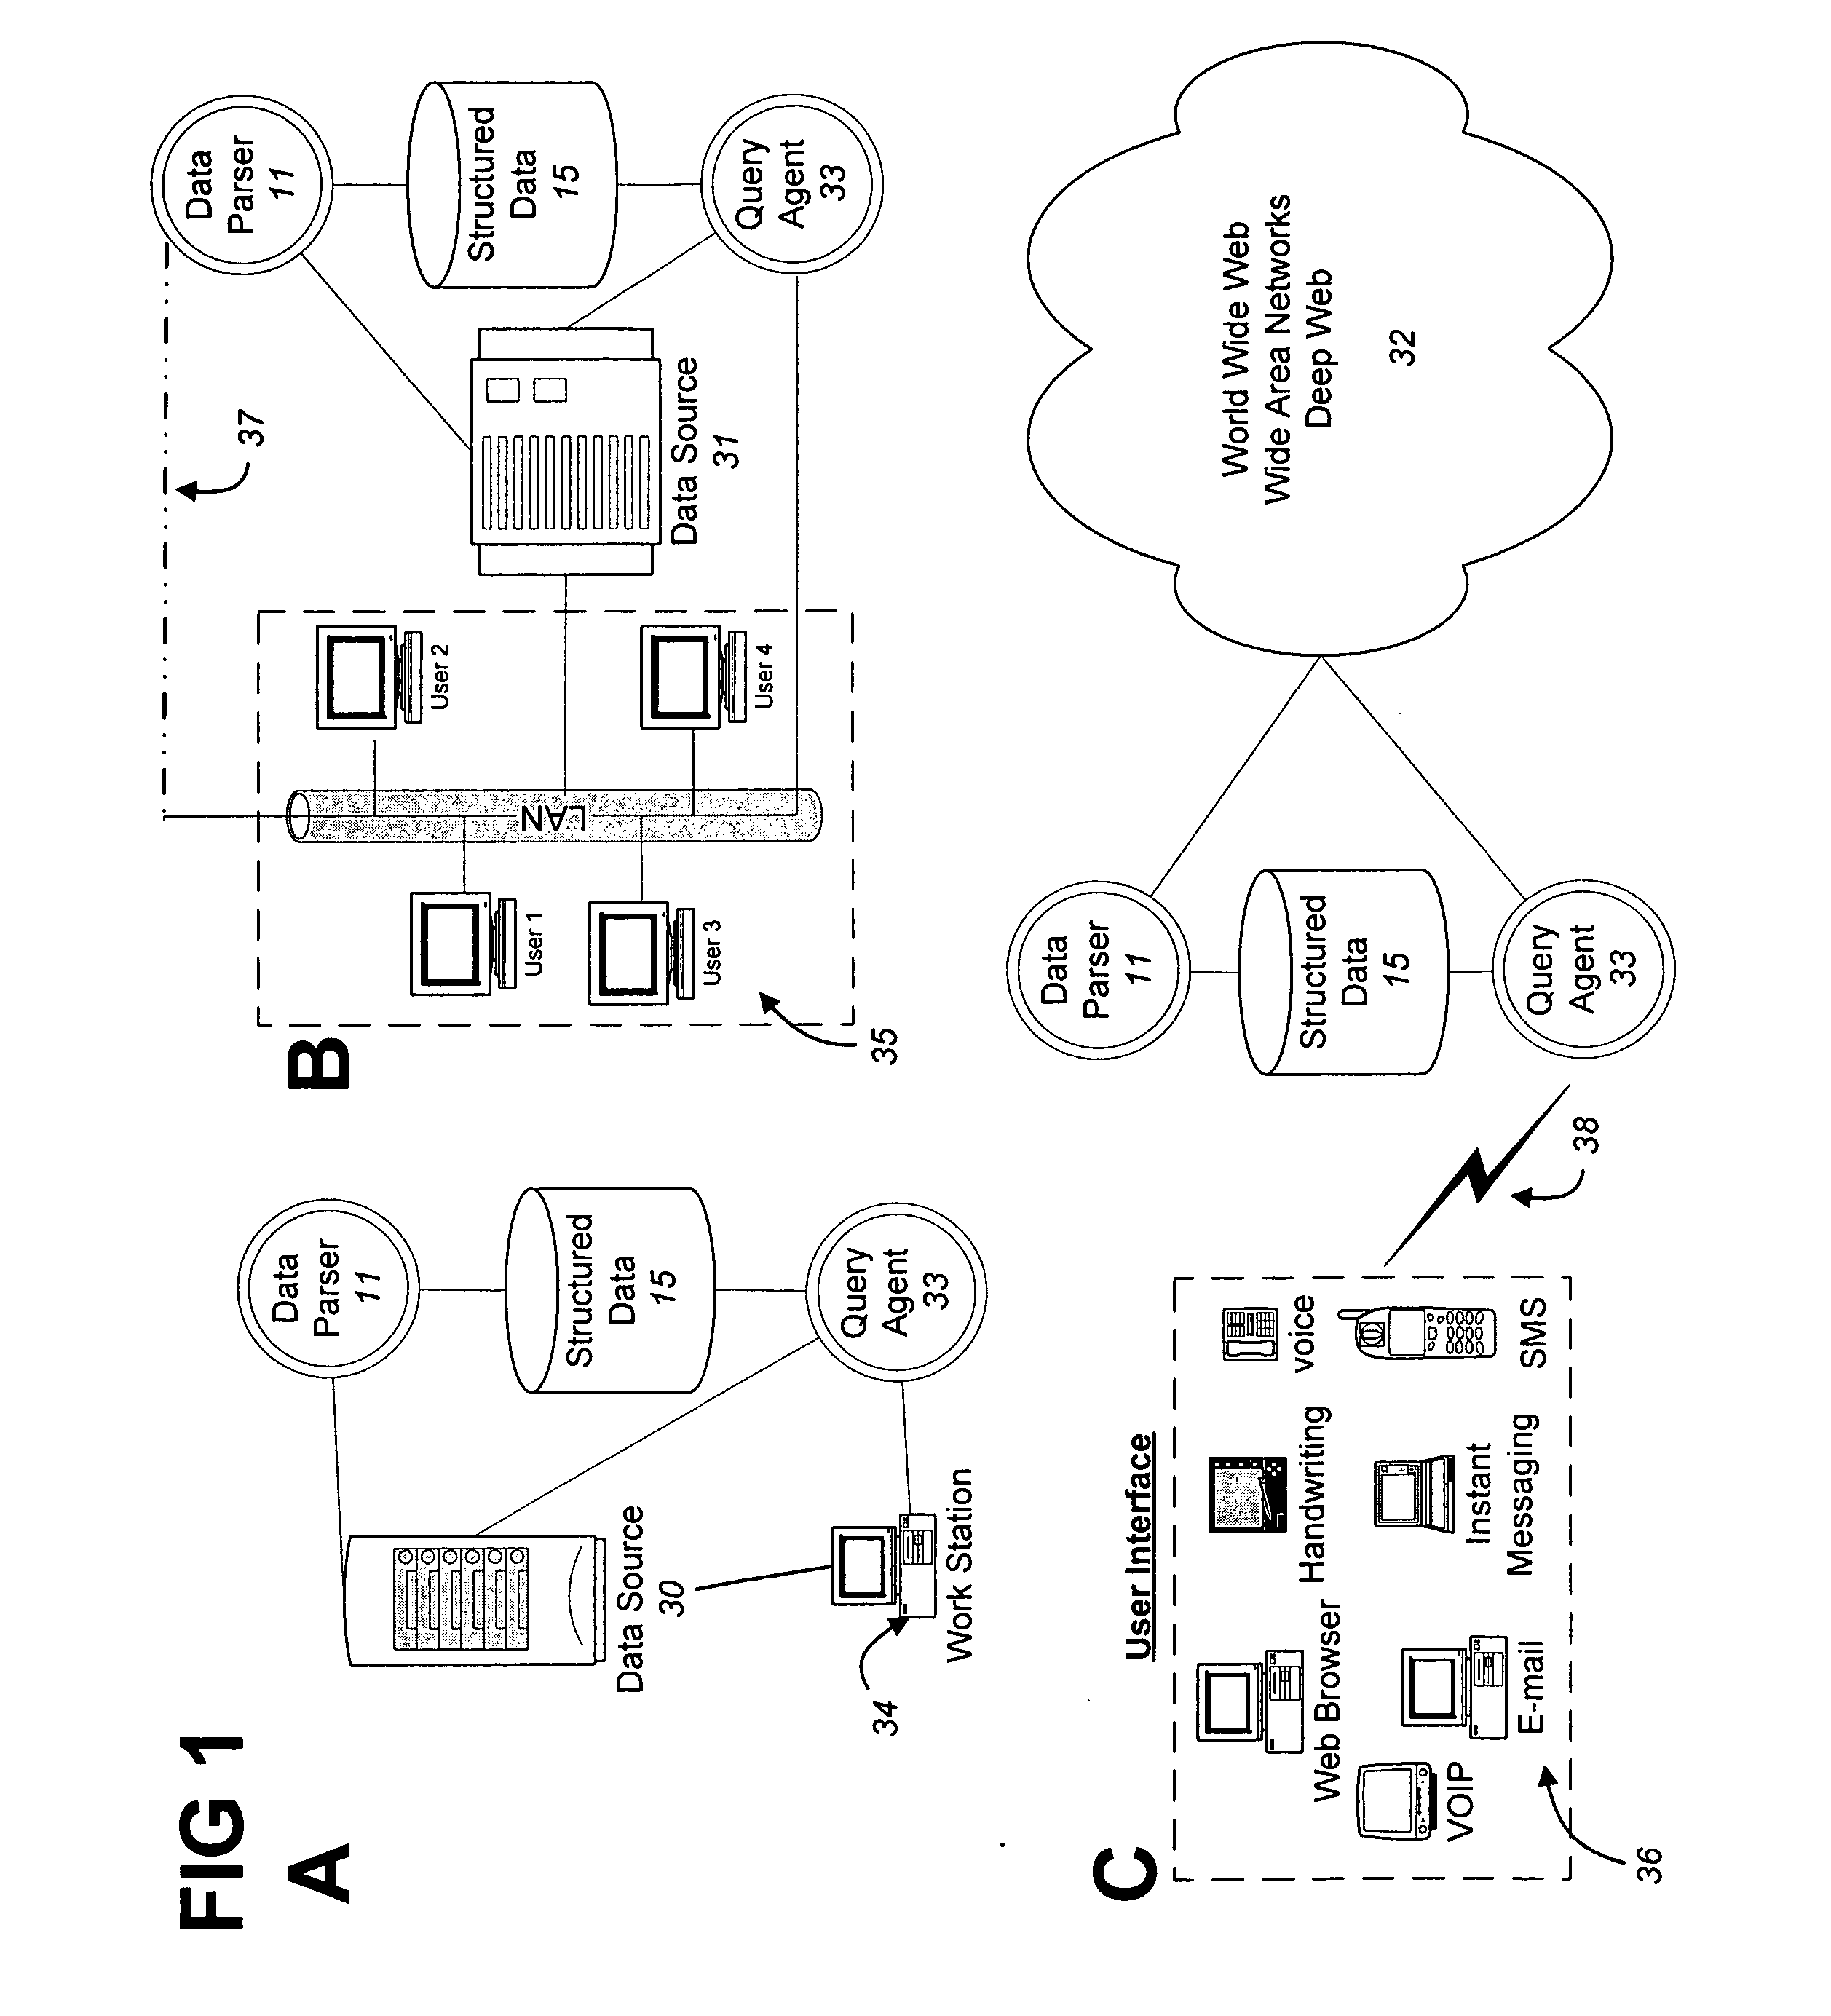 Novel information retrieval systems and methods